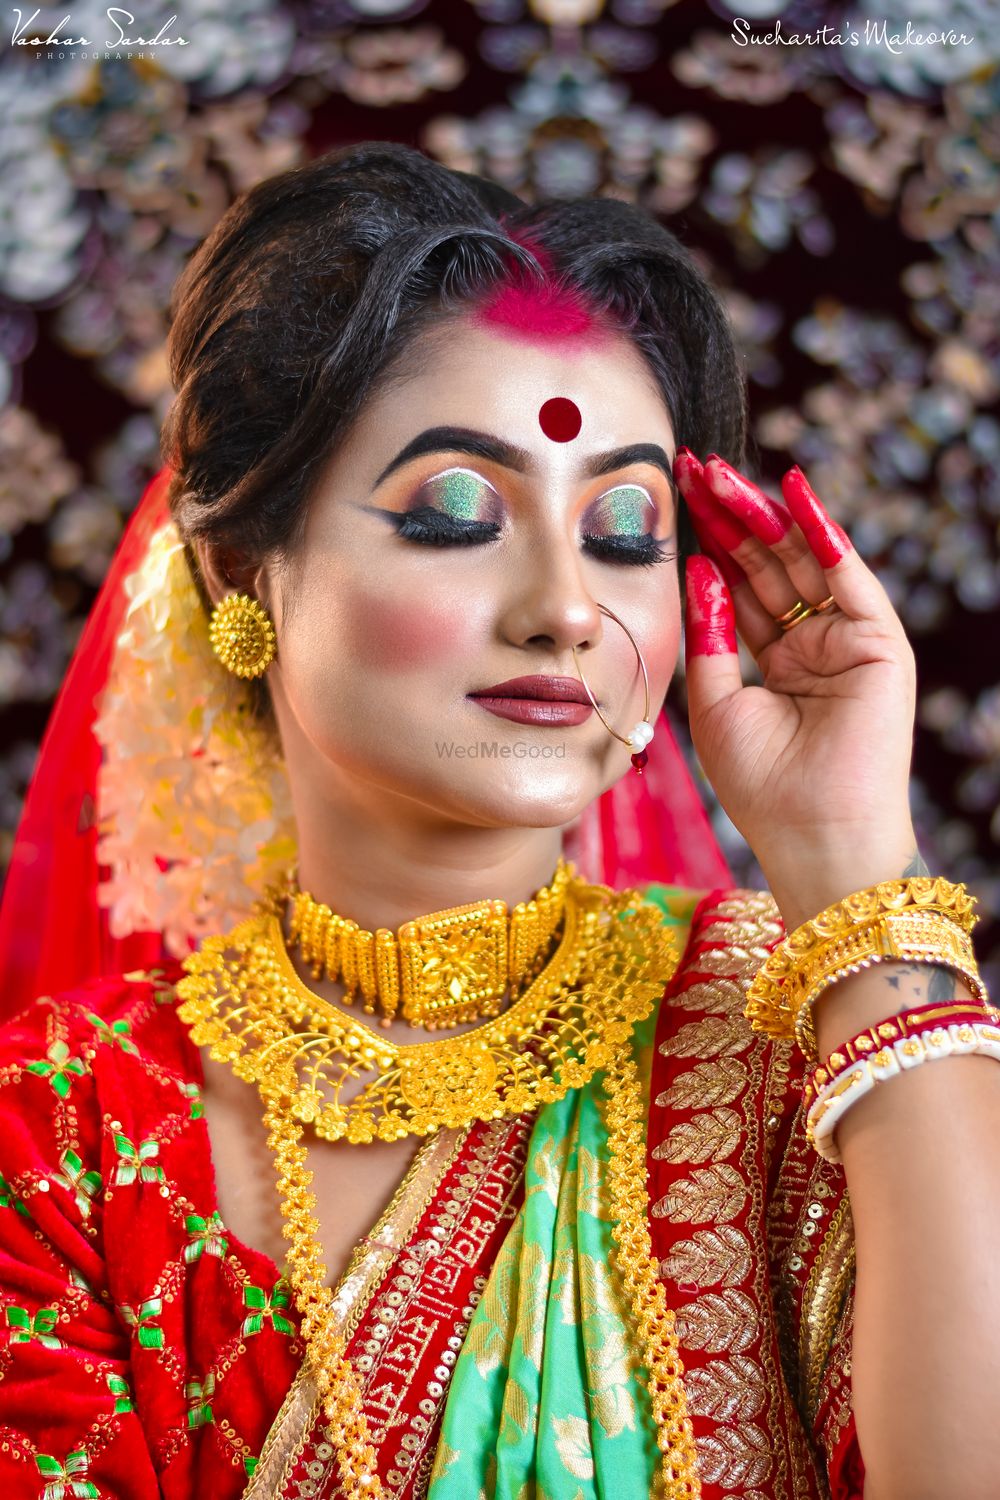 Photo From Bridal Makeover - By Sucharita's Professional Bridal Makeup Artist